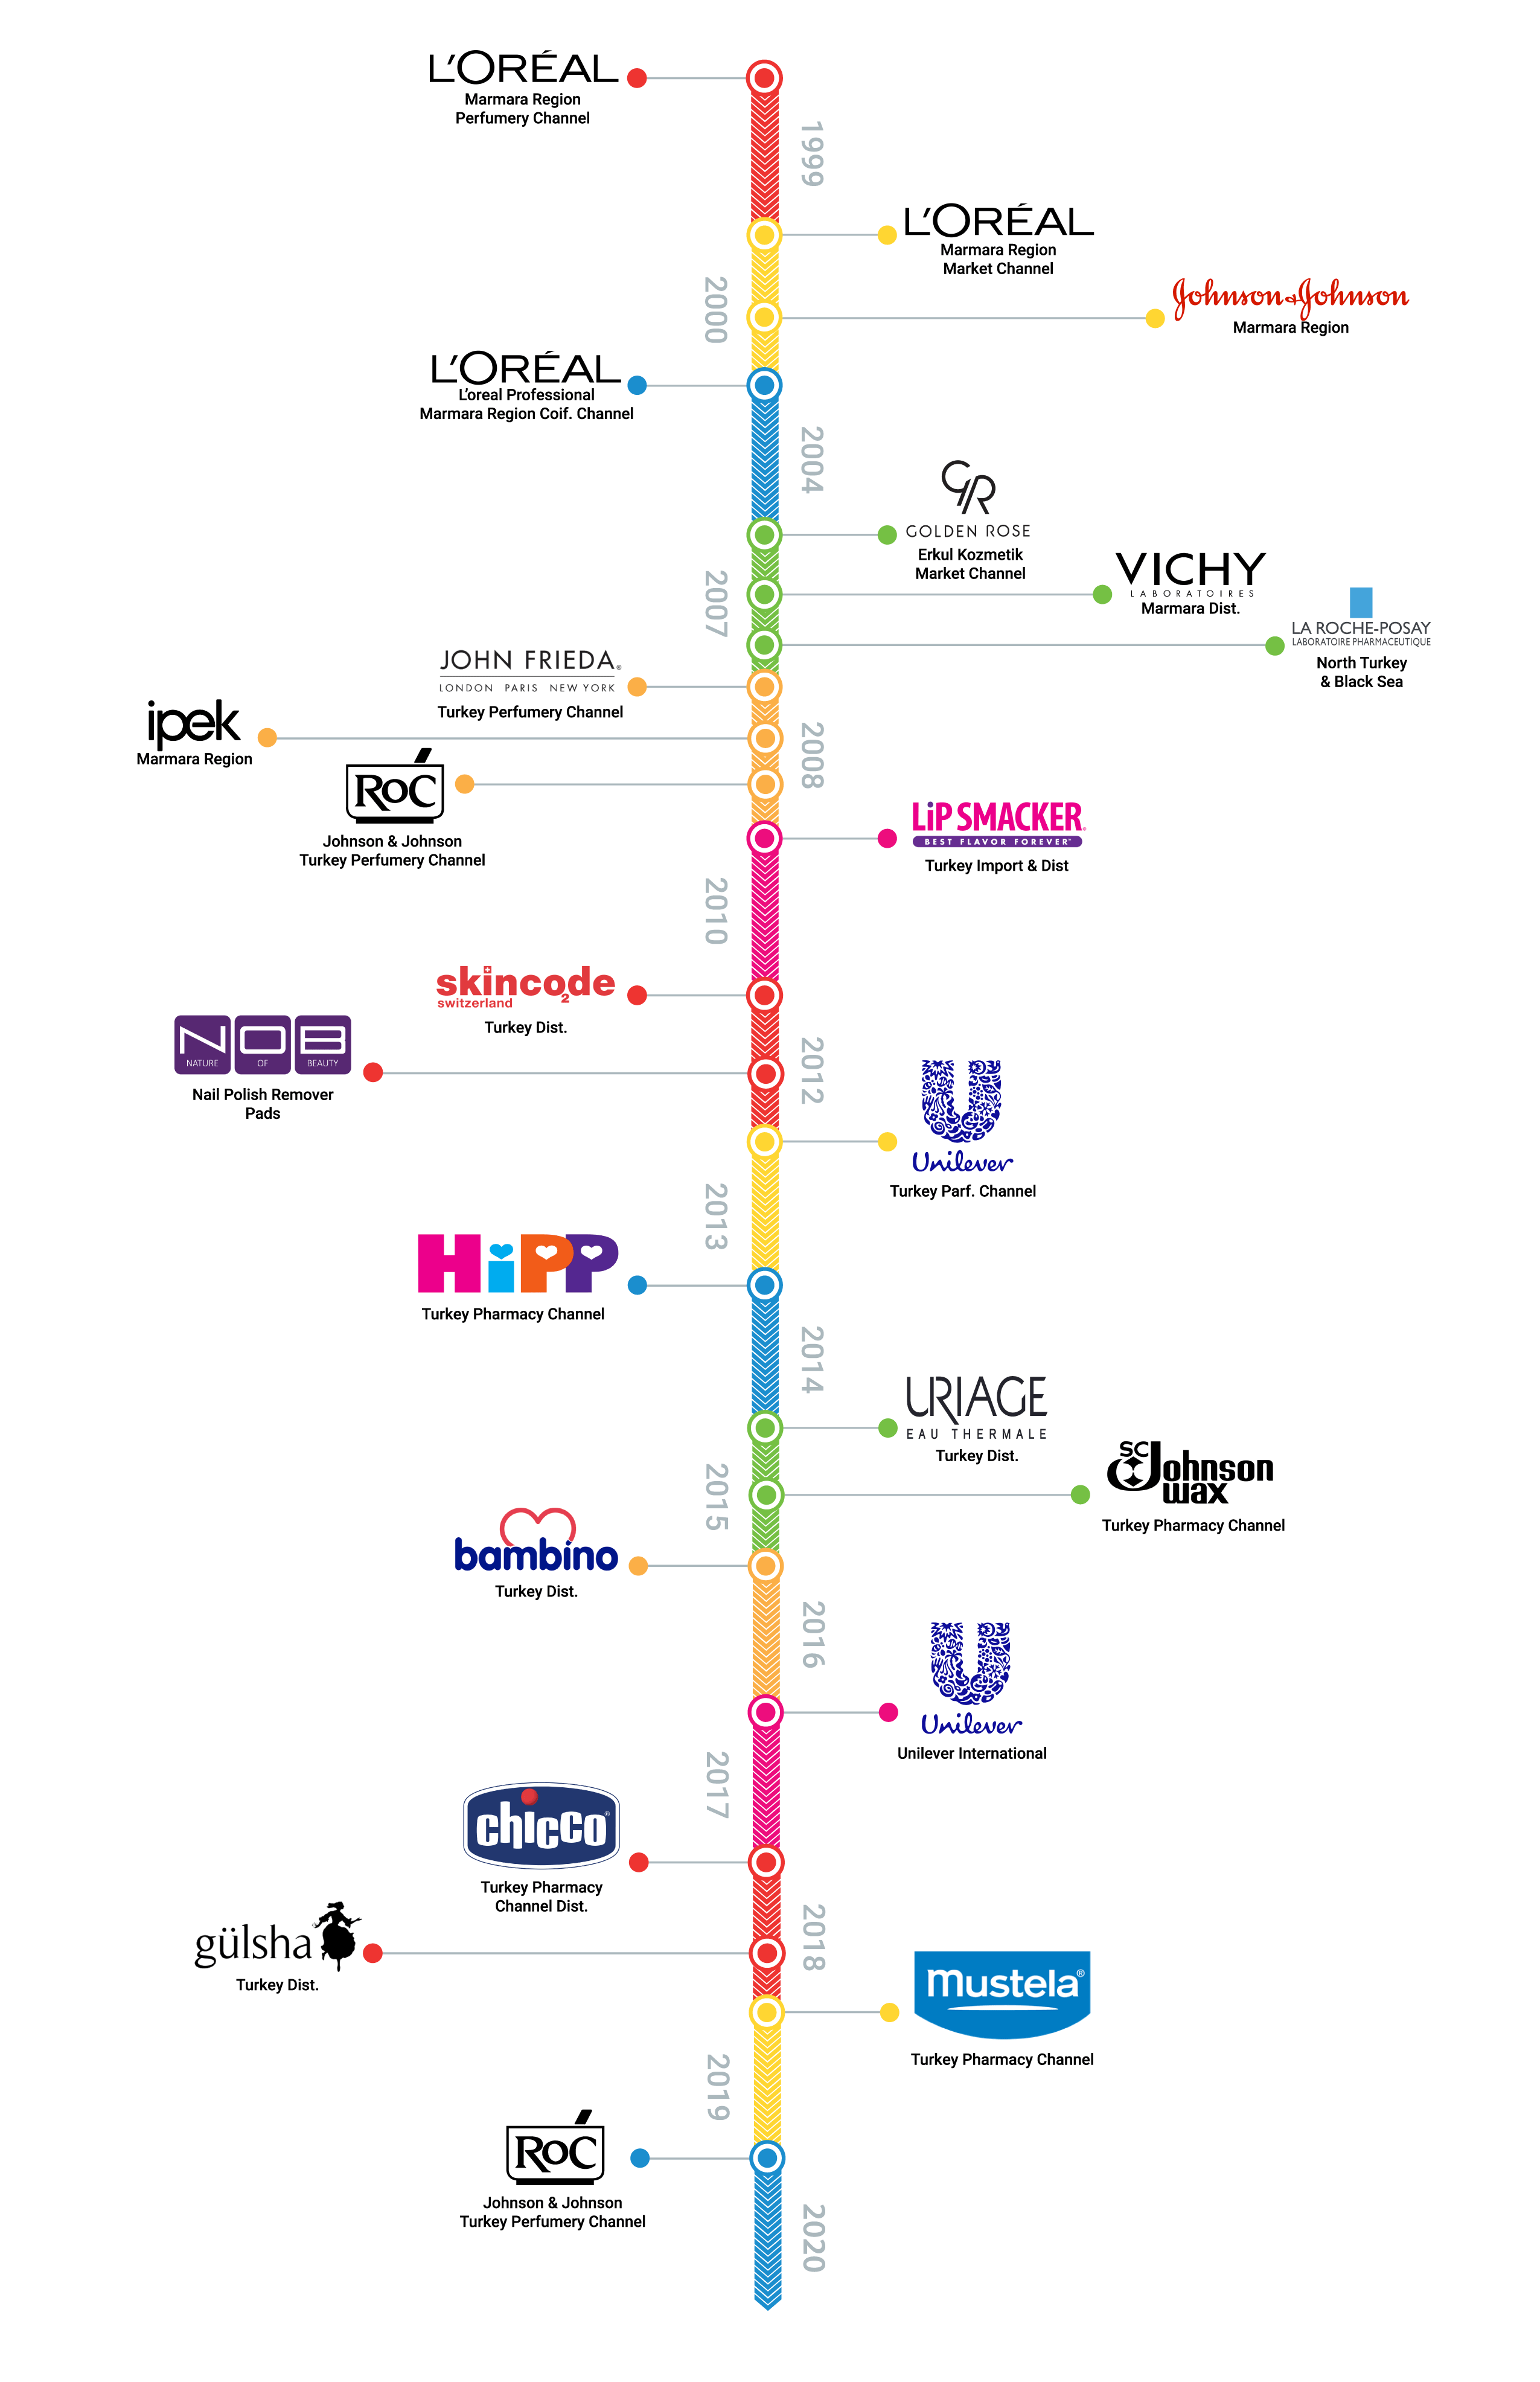 Our History with the Brands